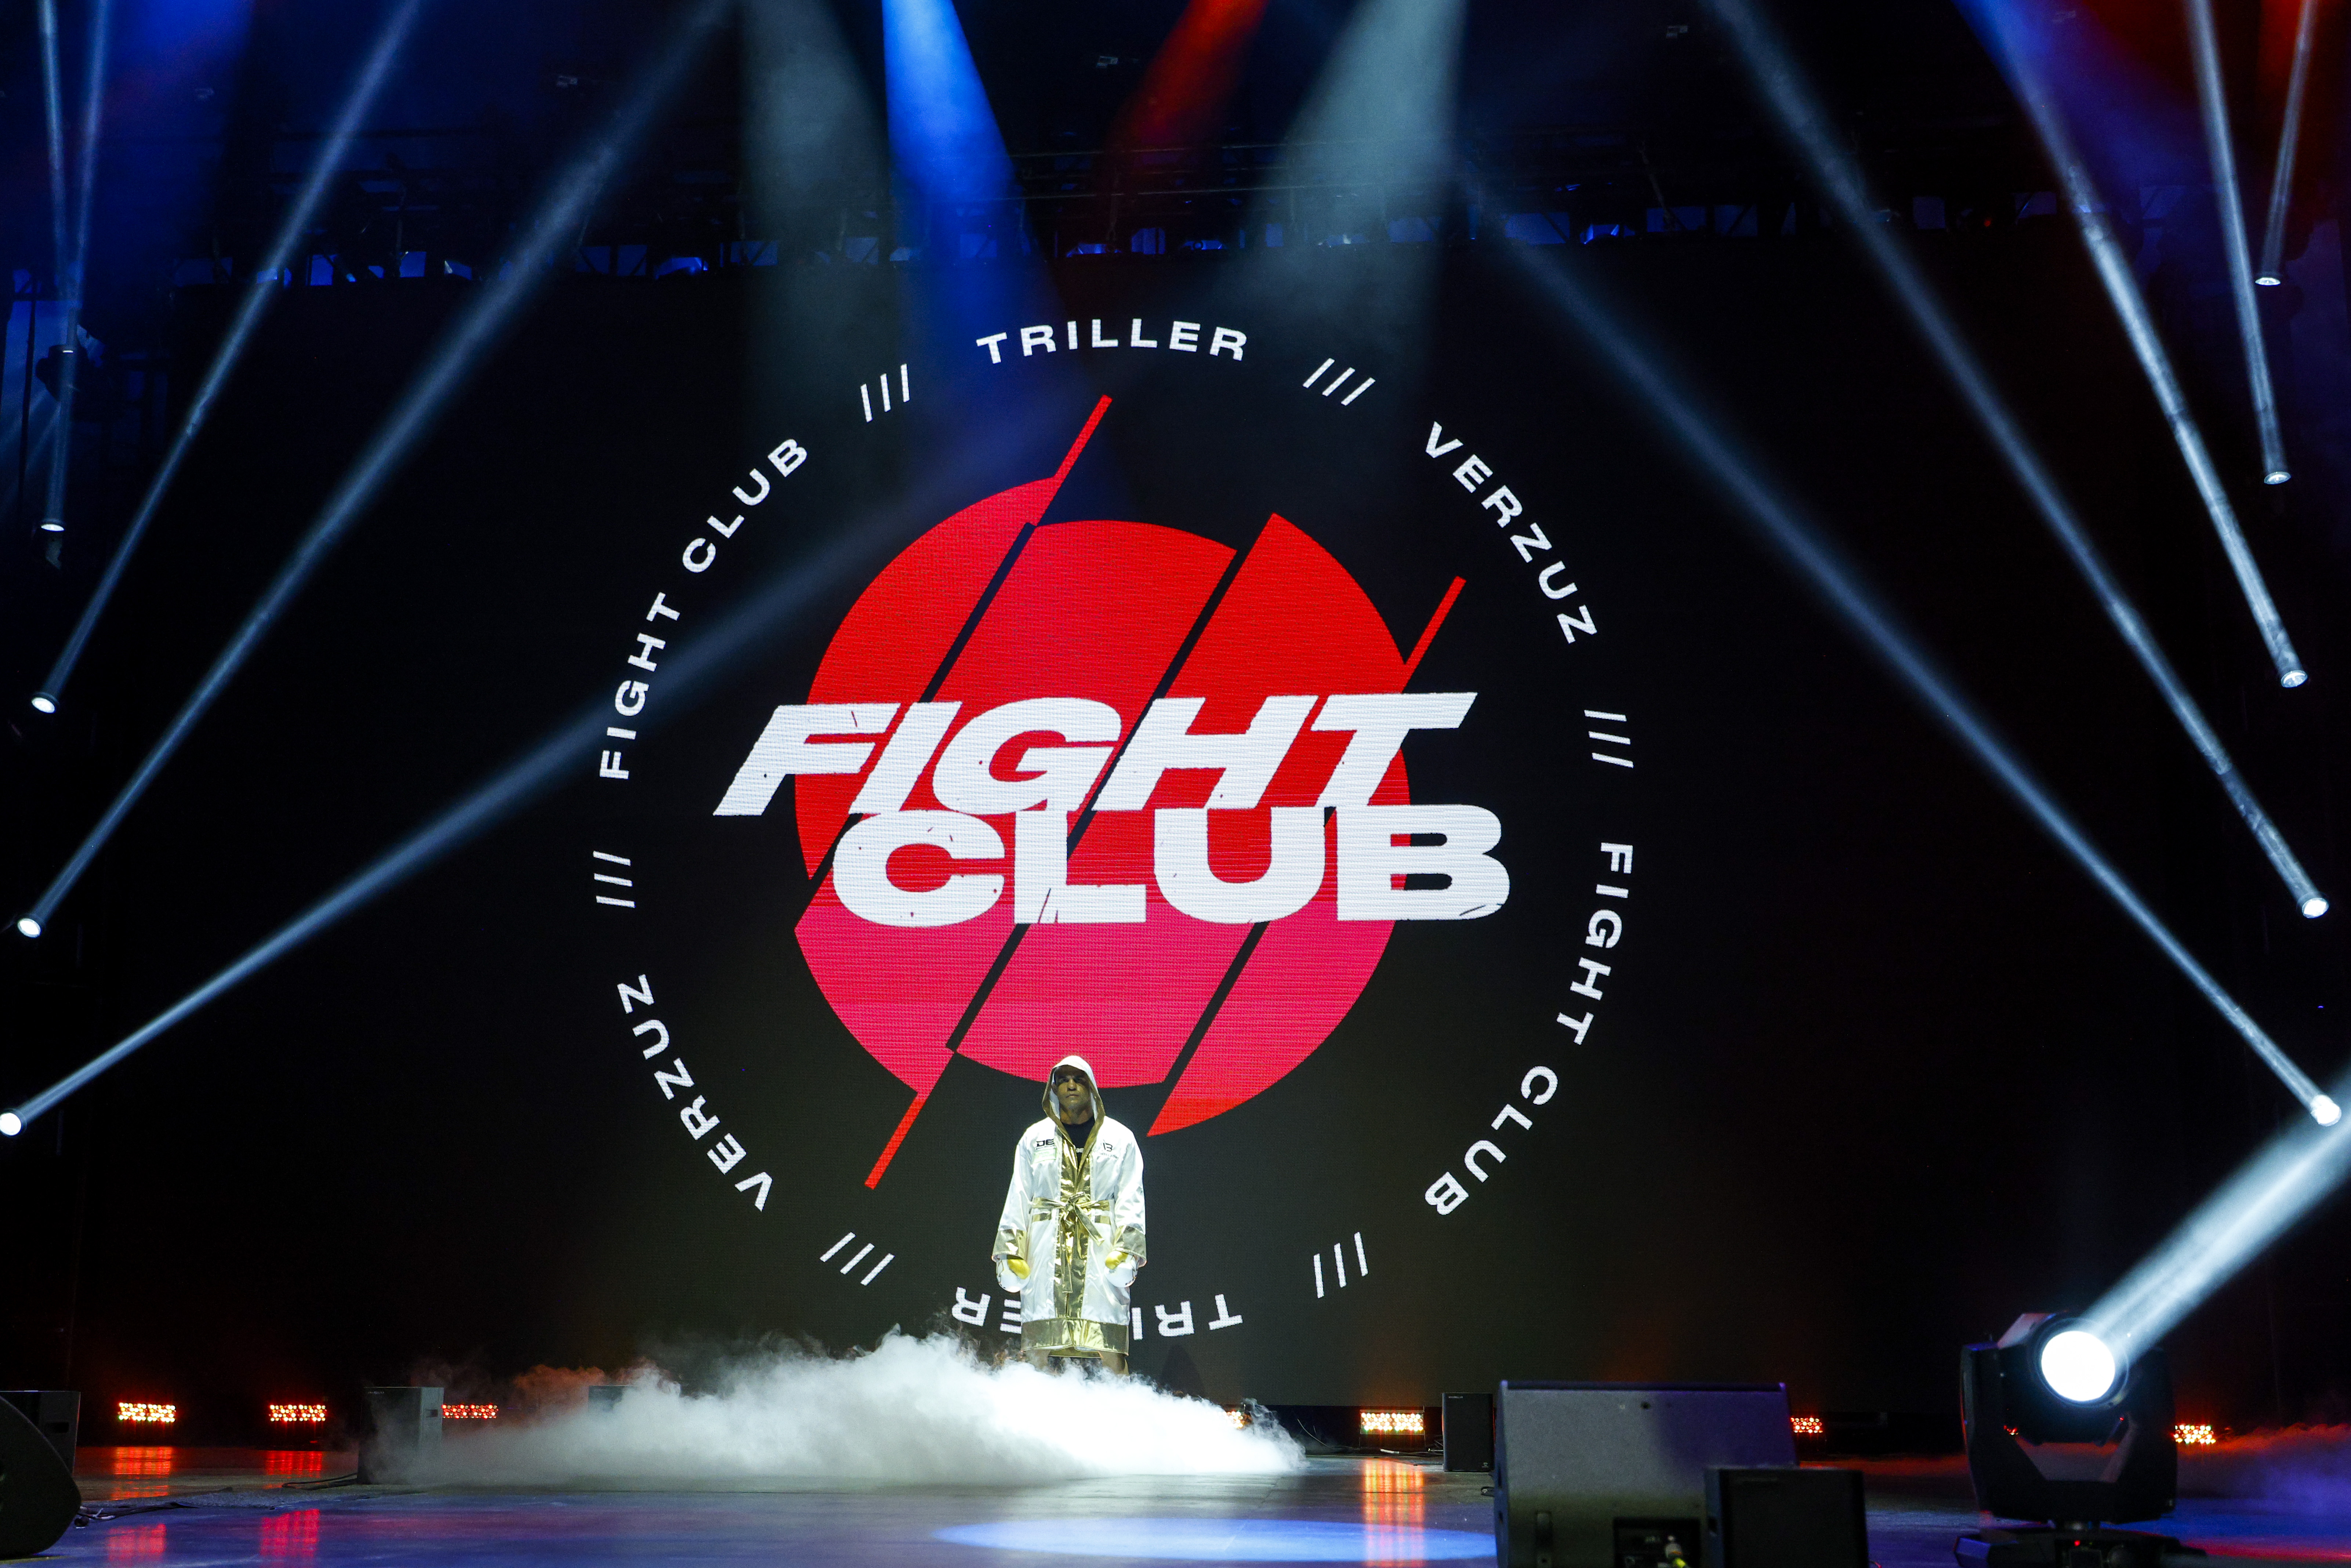 Vitor Belfort won’t fight on October 22nd, but doesn’t he look great in front of this giant Triller logo? 